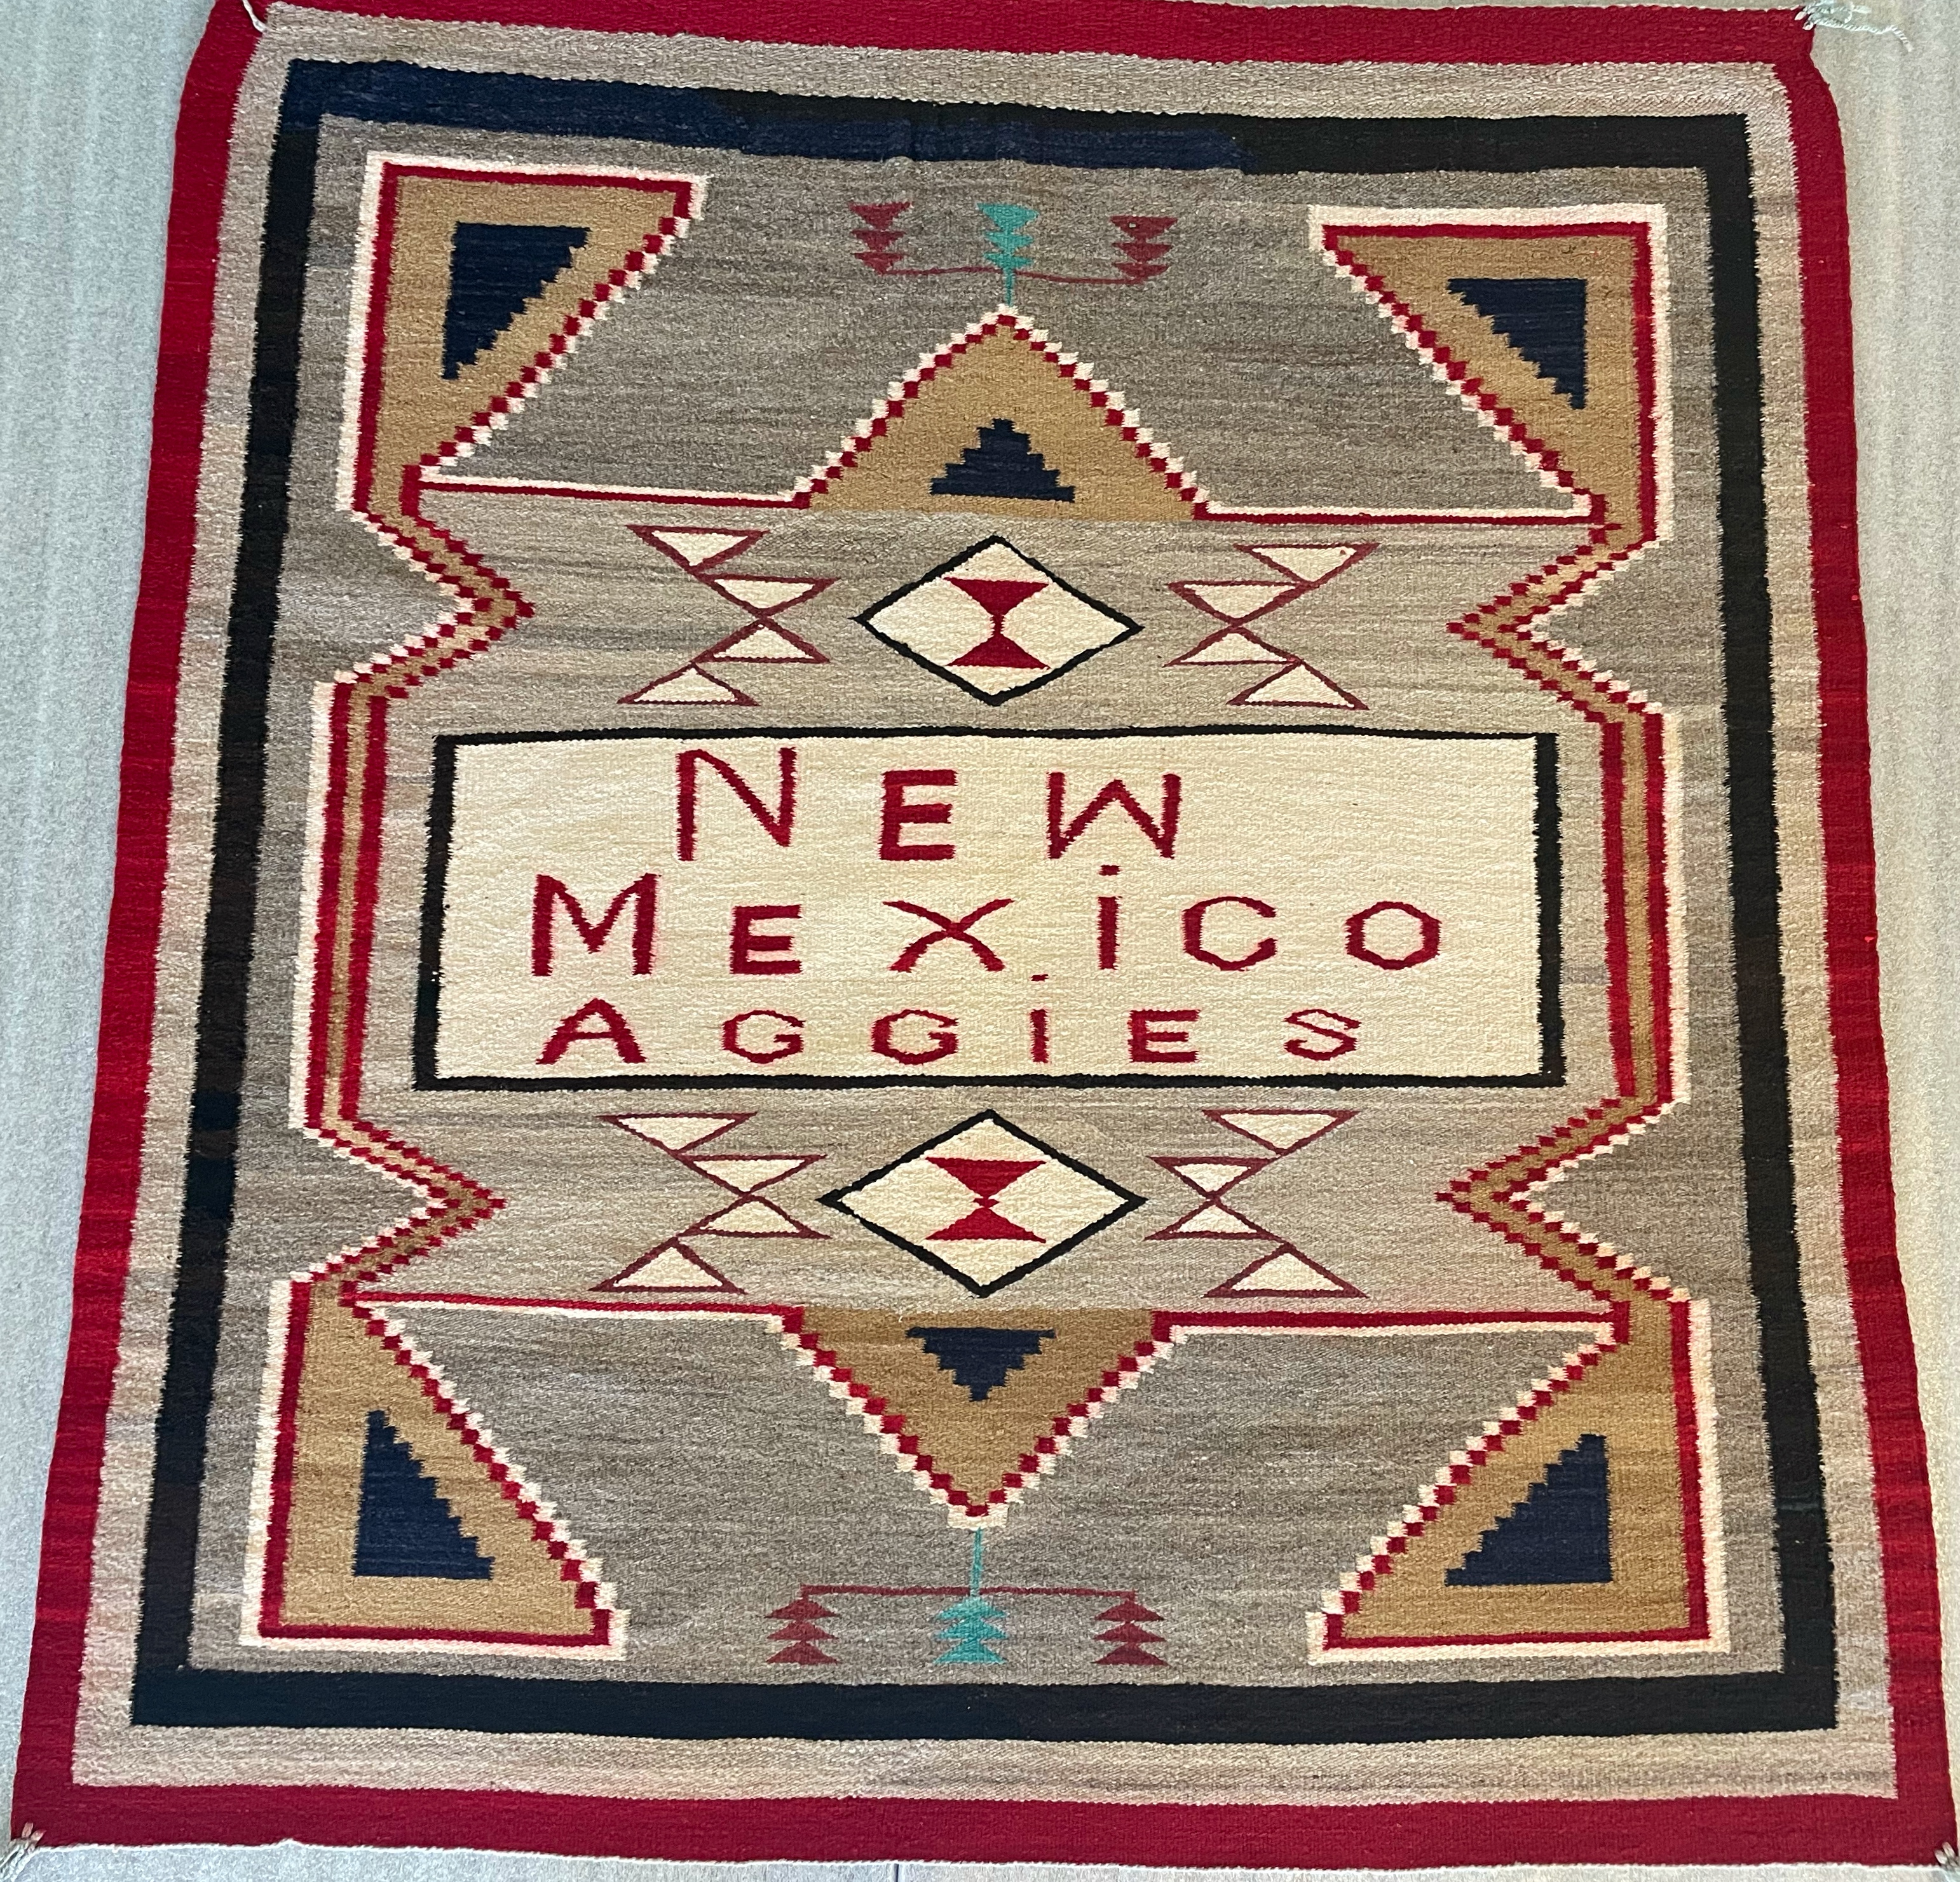 Brown woven rug featuring white, tan, red, and black geometric designs and New Mexico Aggies in the center